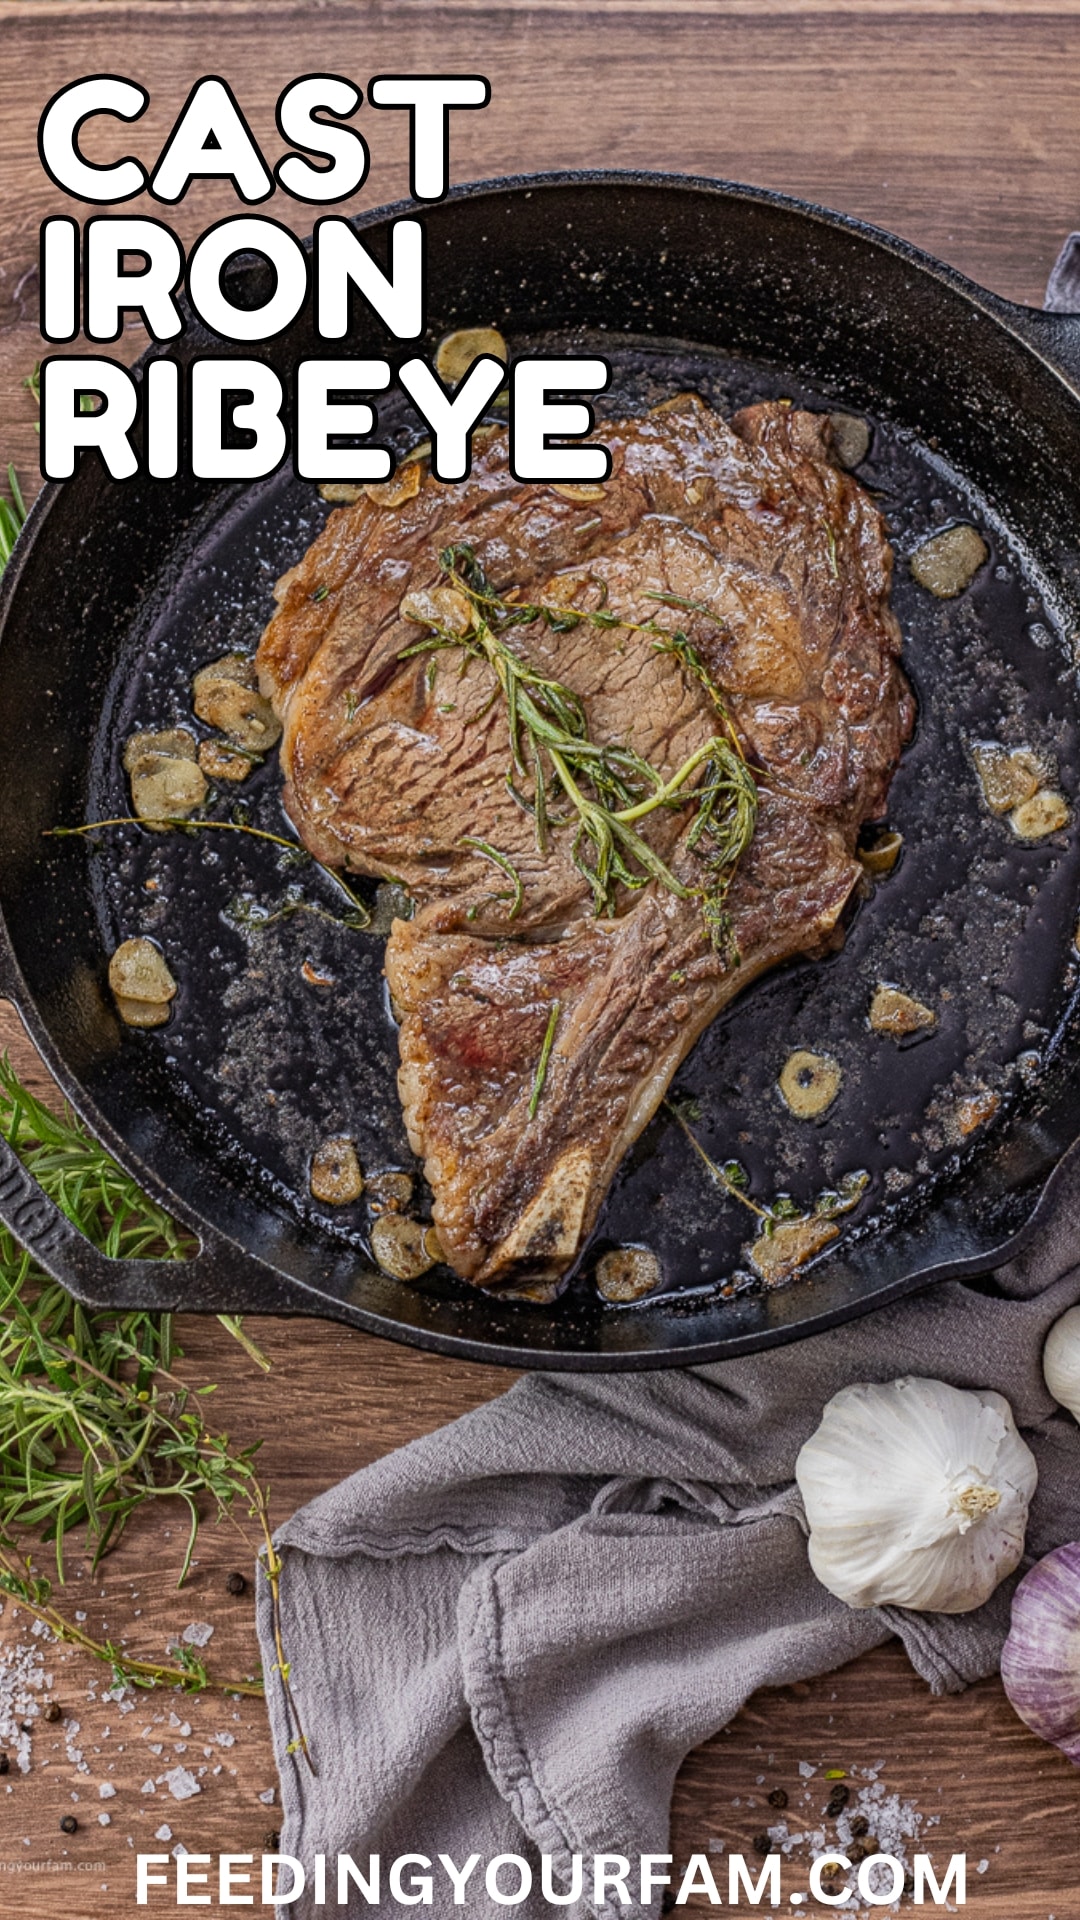 This is my foolproof method for cooking a perfect Cast Iron Ribeye Steak on the stovetop. If you want a restaurant quality ribeye steak right at home, this is the recipe you need to try.